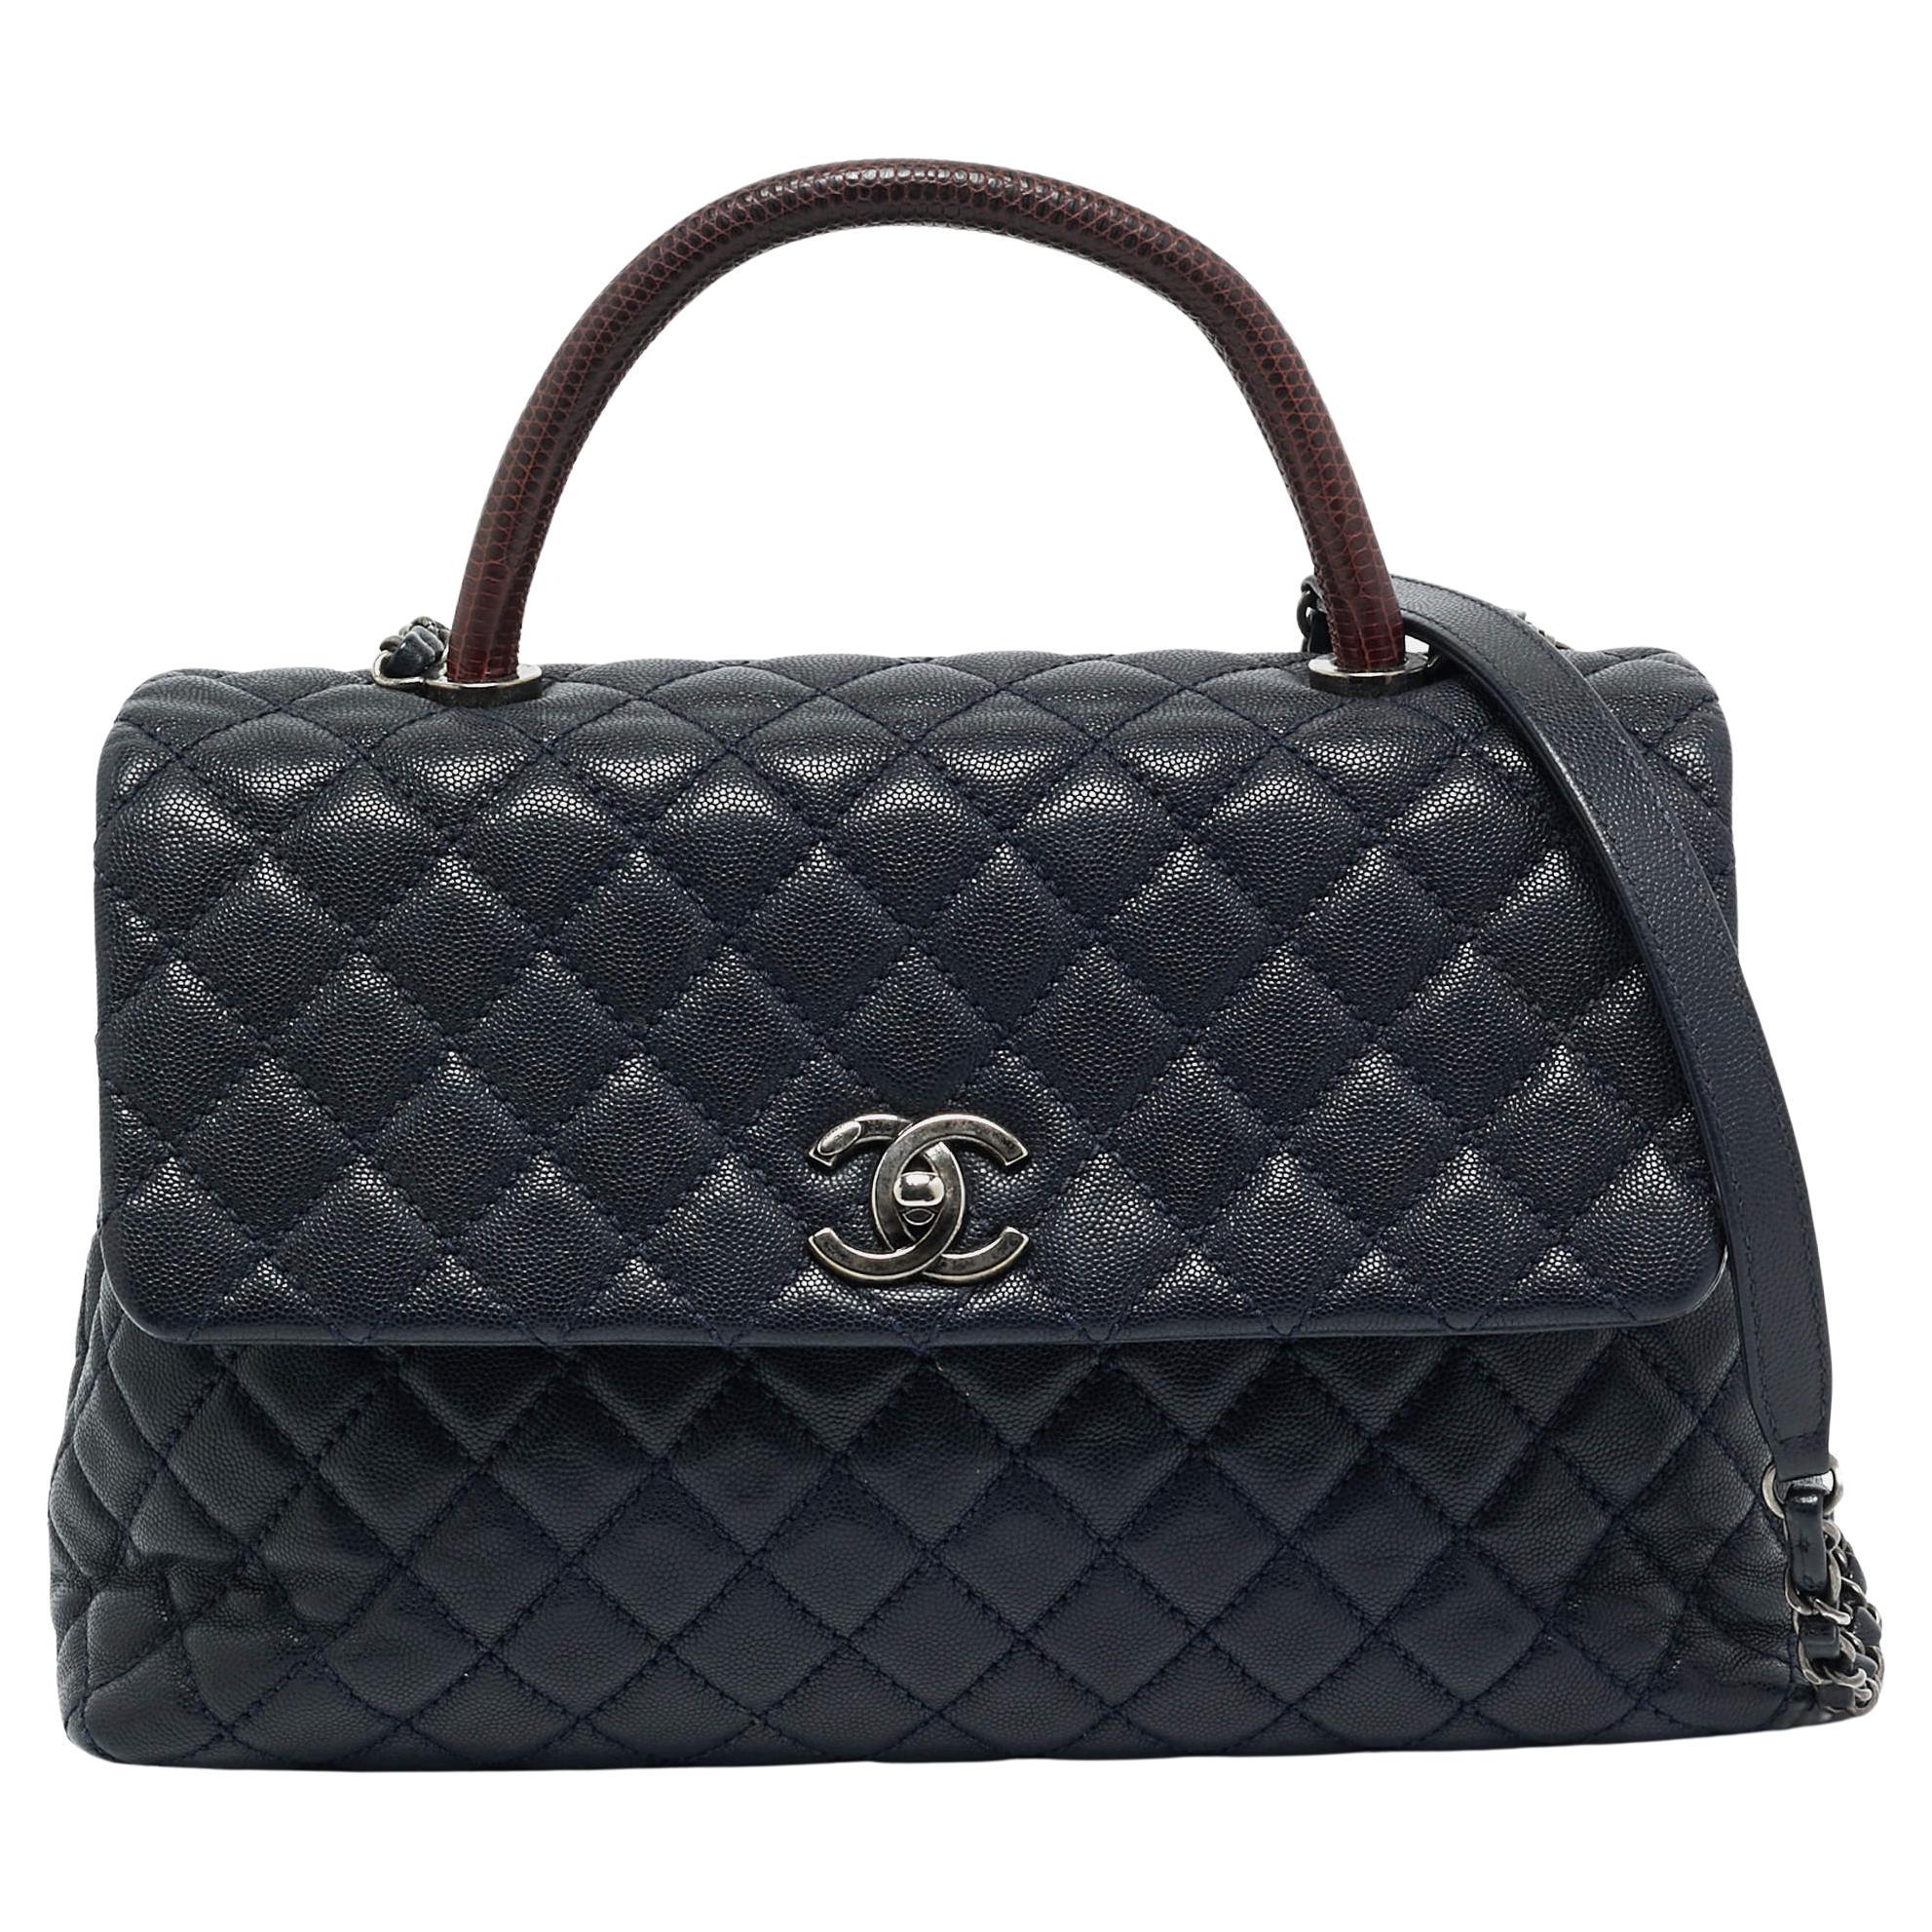 Chanel Dark Blue/Burgundy Quilted Caviar Leather and Lizard Large Coco Top Handl For Sale